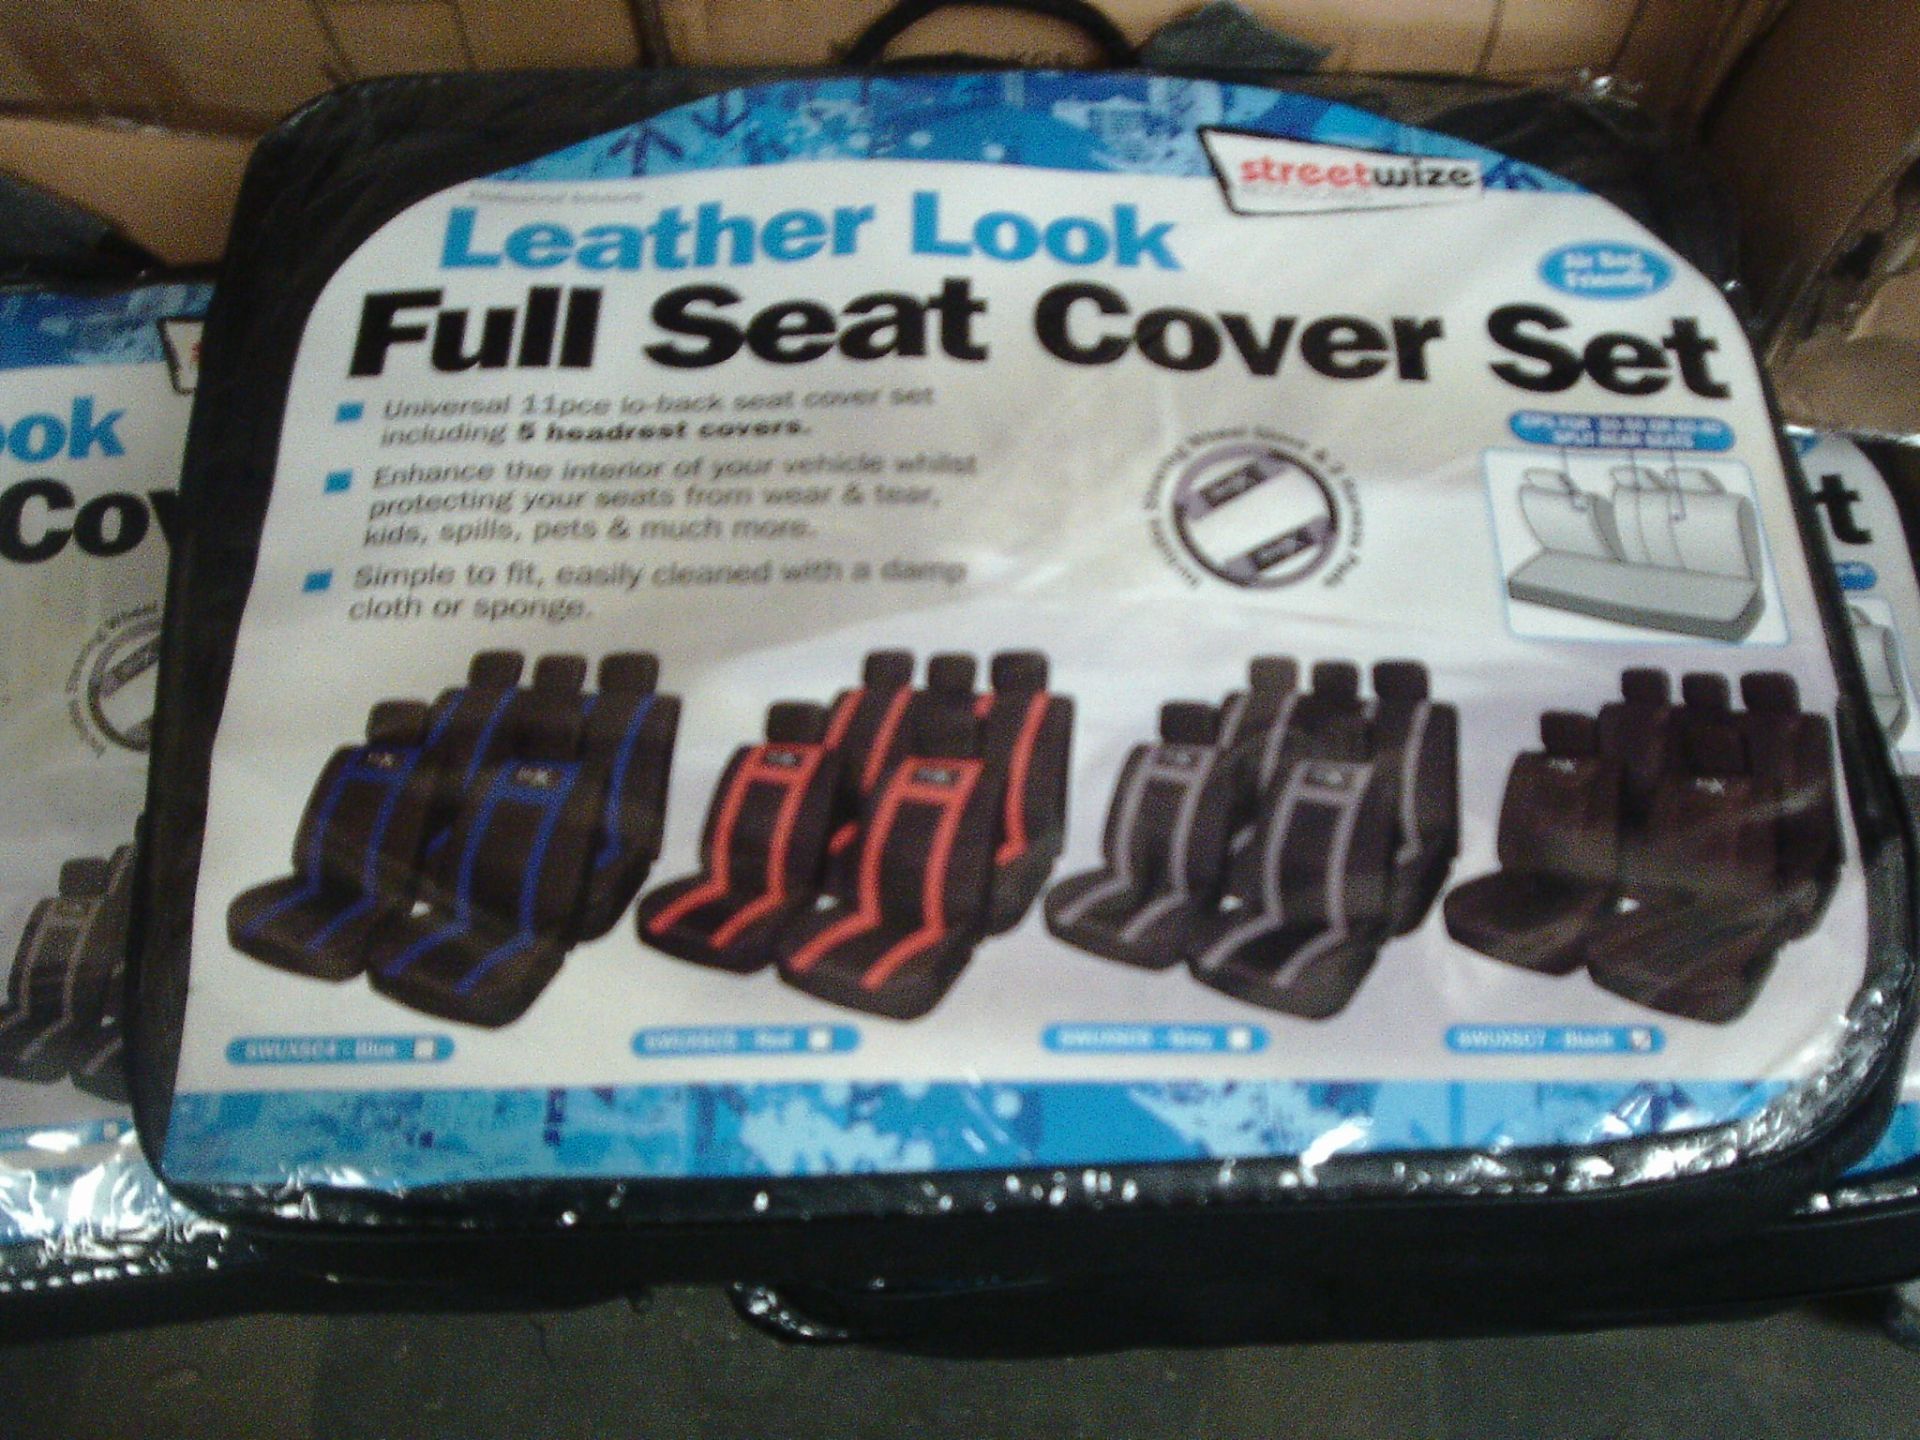 5pcs x  Leather look  full seat cover set - bagged rrp £35.00